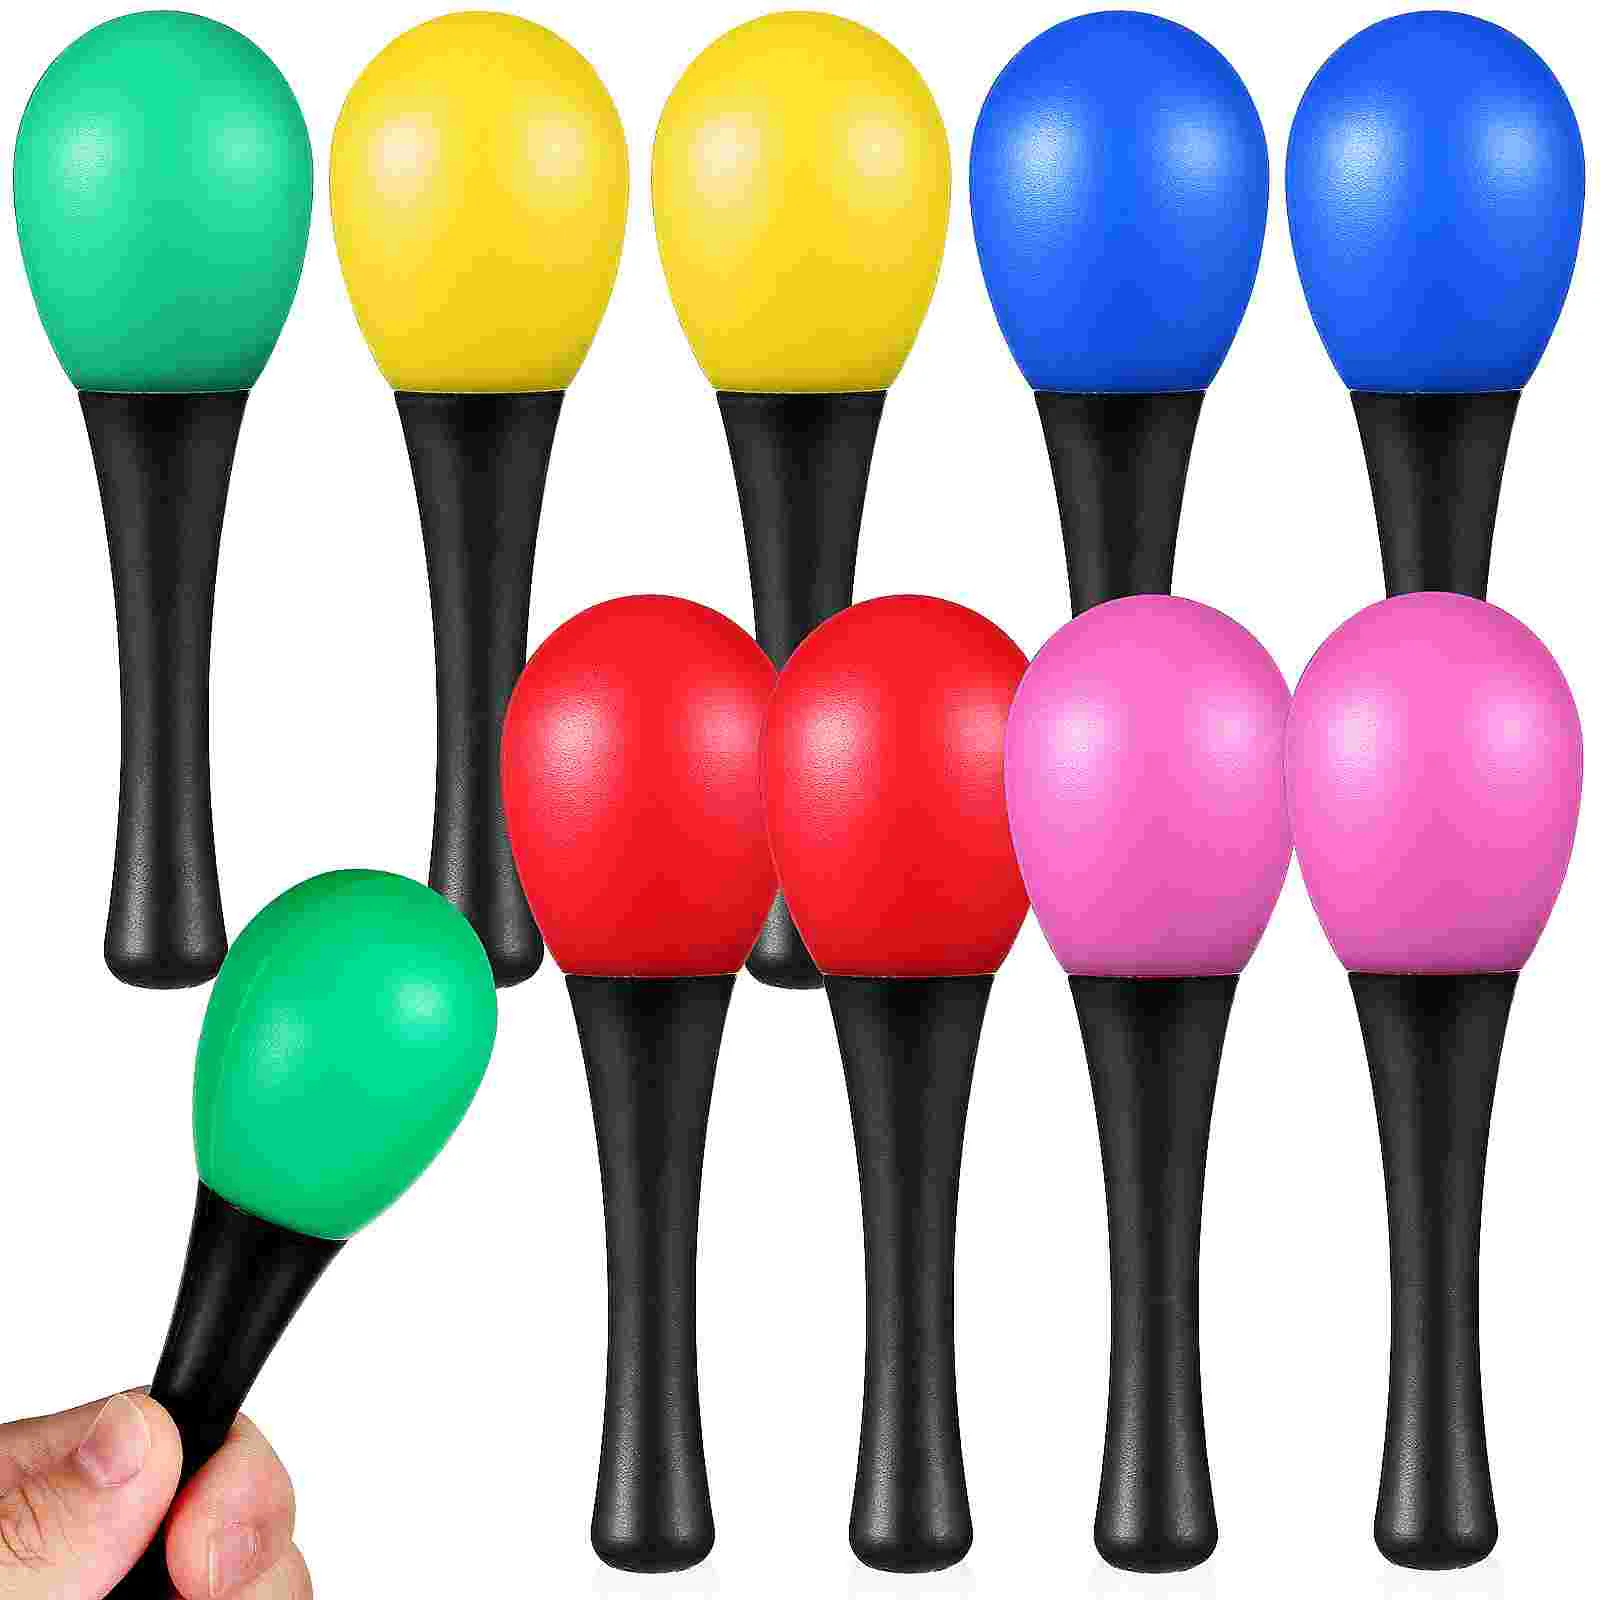 

10 Pcs Small Maraca Mexican Party Favors Percussion Instruments Maracas Plaything Toys Shaking Hammer Musical Sand Playthings